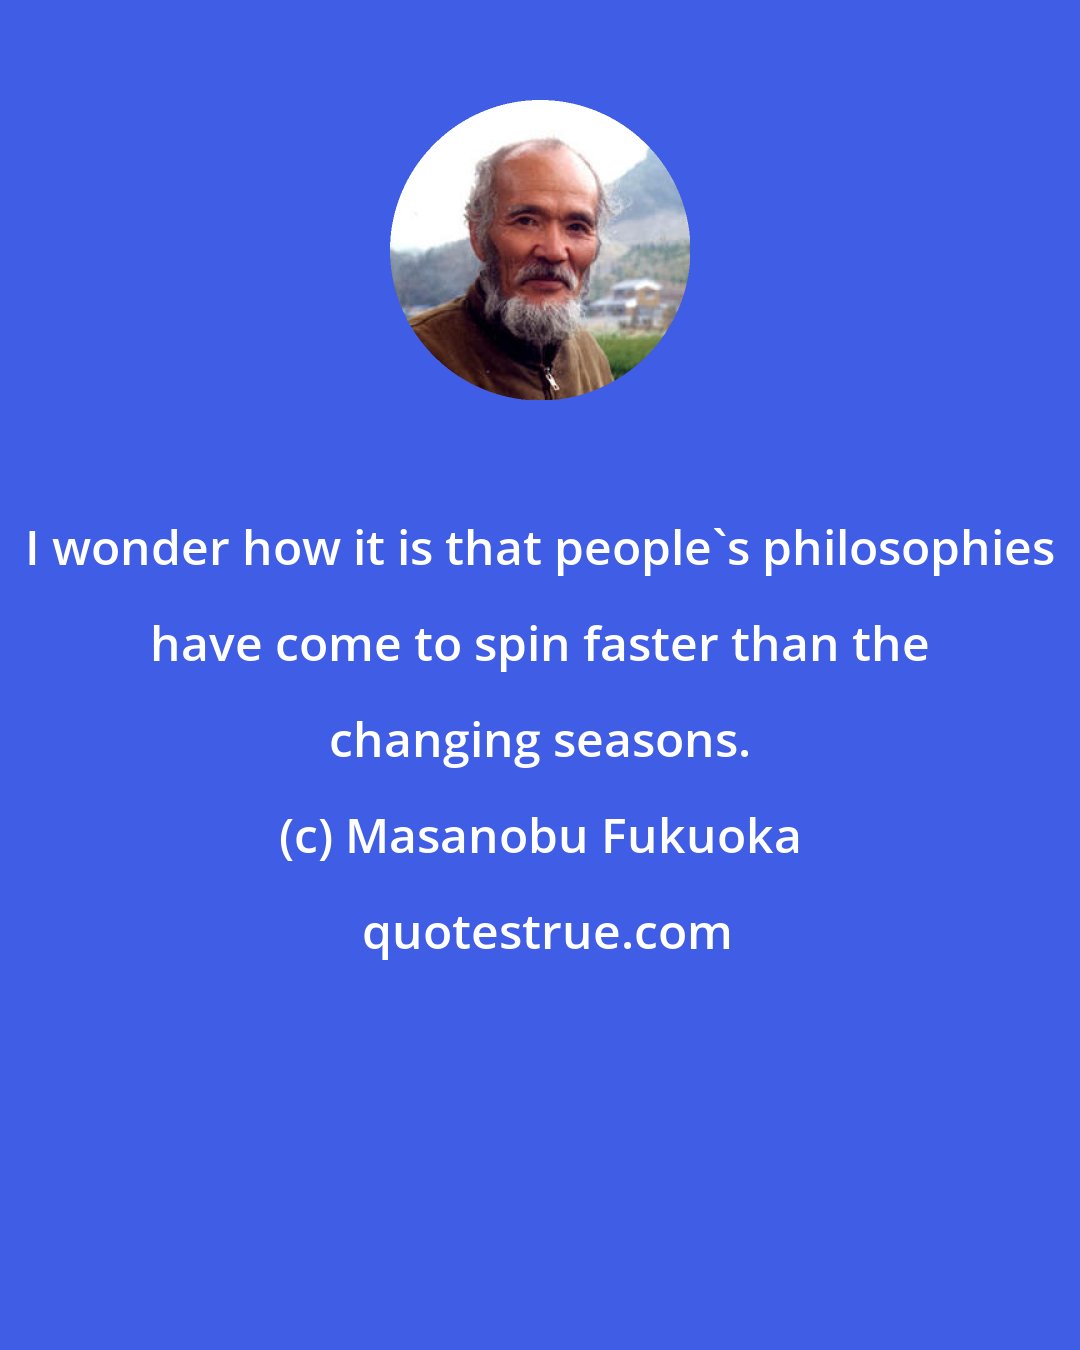 Masanobu Fukuoka: I wonder how it is that people's philosophies have come to spin faster than the changing seasons.